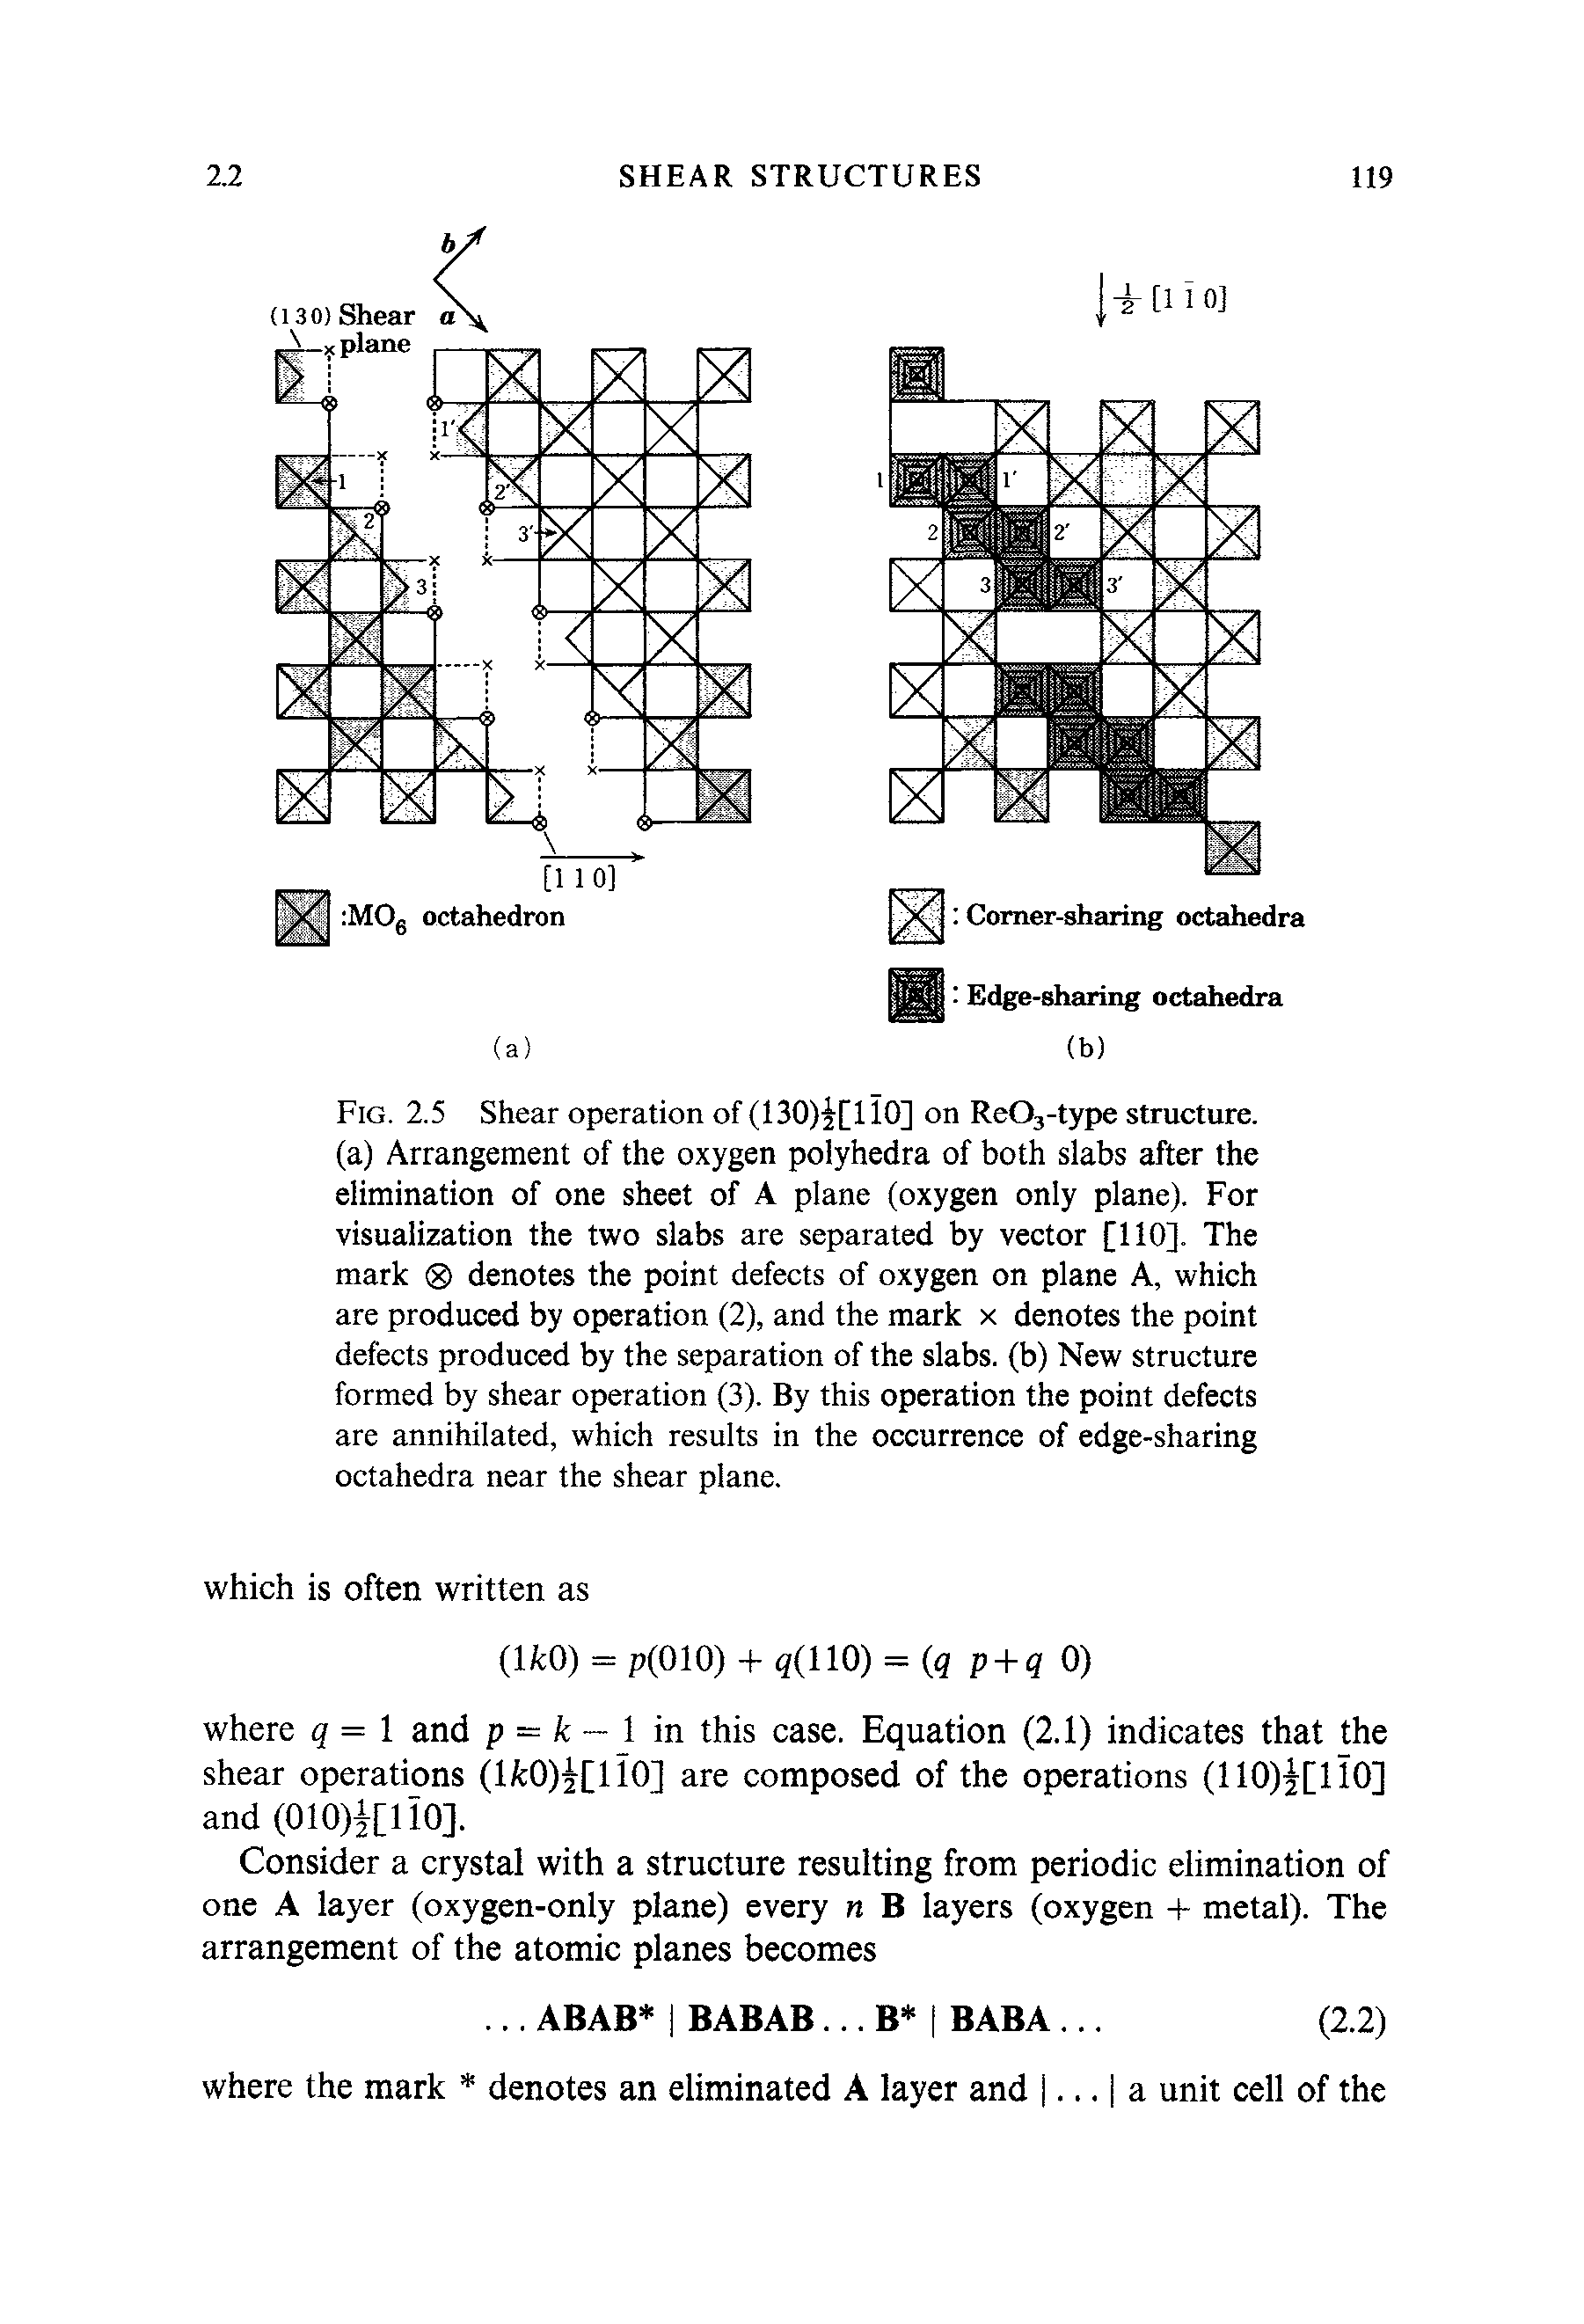 Fig. 2.5 Shear operation of (130)i[li0] on ReOj-type structure, (a) Arrangement of the oxygen polyhedra of both slabs after the elimination of one sheet of A plane (oxygen only plane). For visualization the two slabs are separated by vector [110]. The mark denotes the point defects of oxygen on plane A, which are produced by operation (2), and the mark x denotes the point defects produced by the separation of the slabs, (b) New structure formed by shear operation (3). By this operation the point defects are annihilated, which results in the occurrence of edge-sharing octahedra near the shear plane.